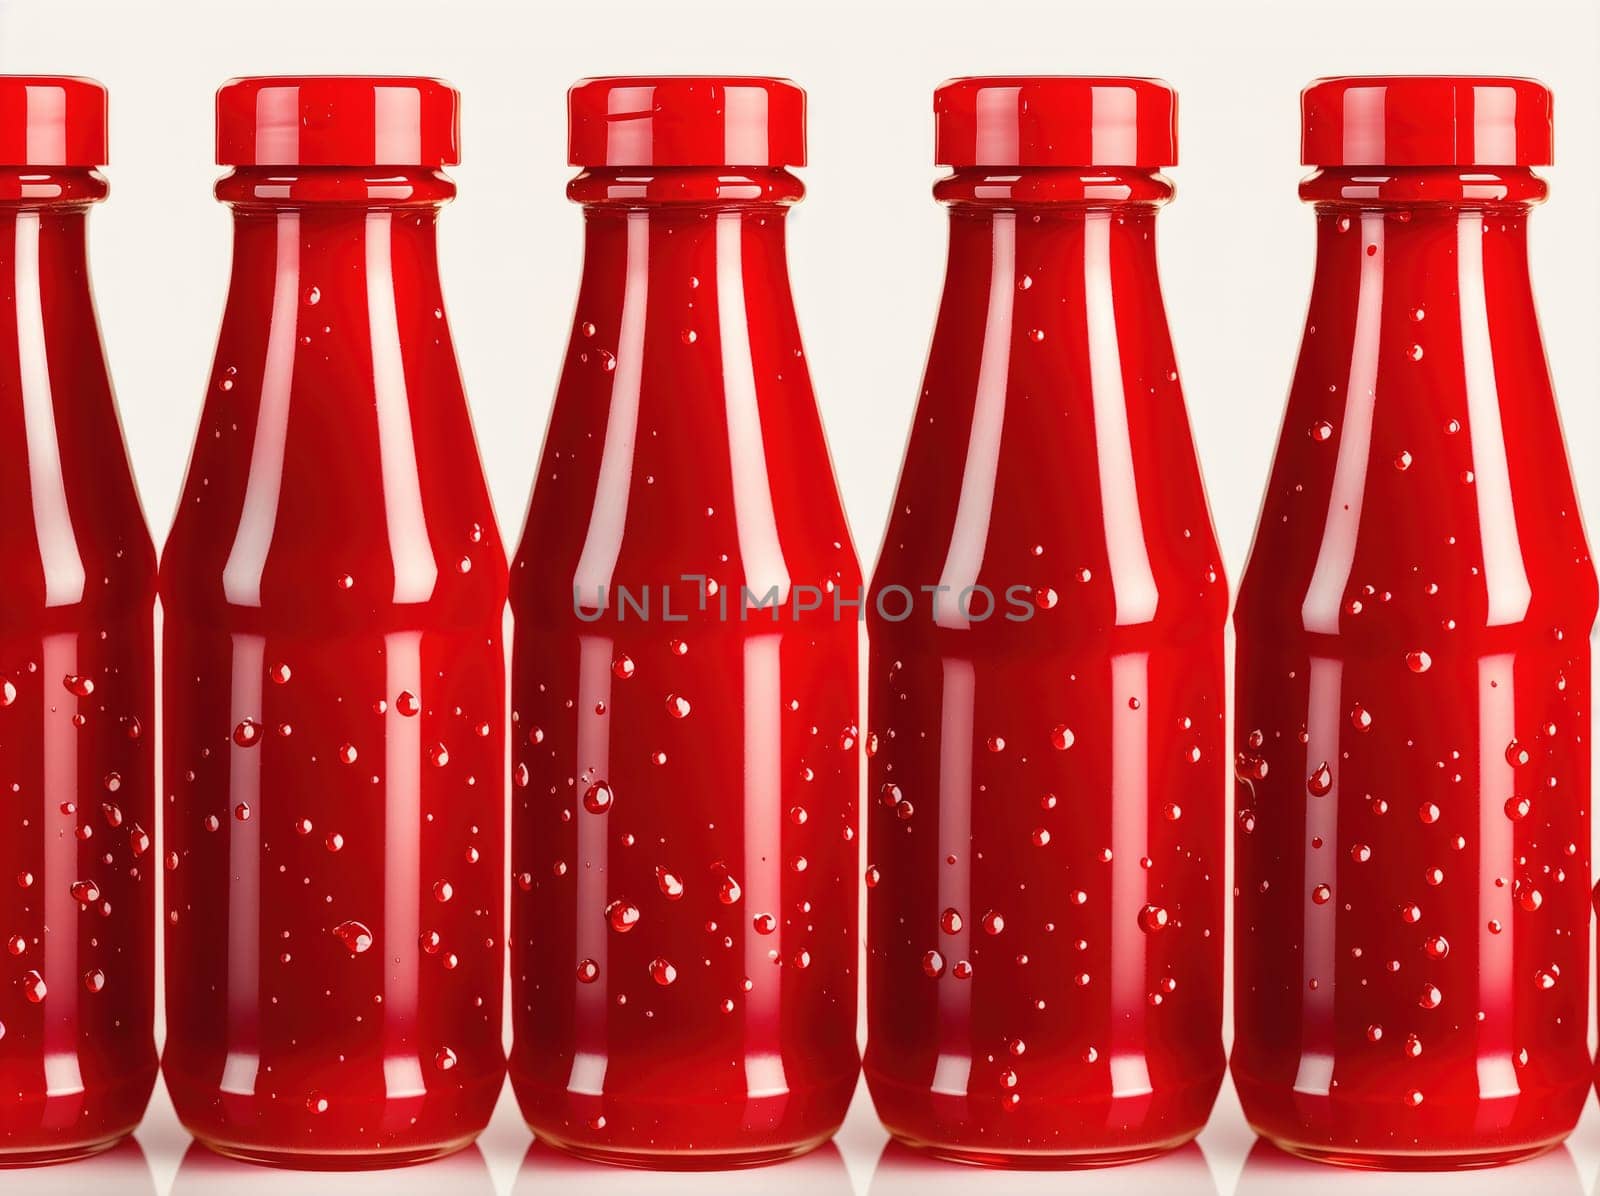 The image is a group of six red glass bottles with different shapes and sizes on a white background.